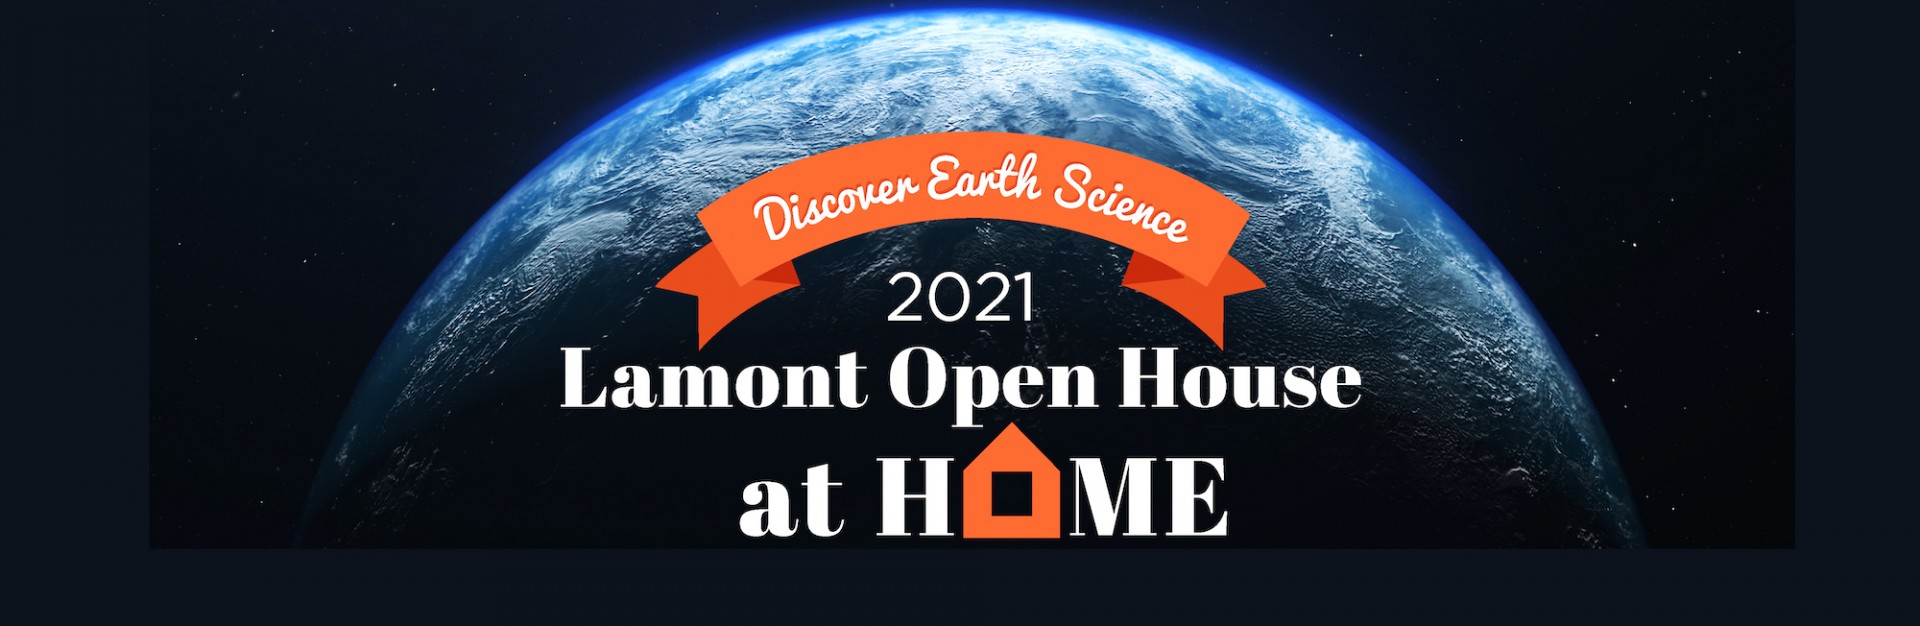 Lamont Open House at Home banner